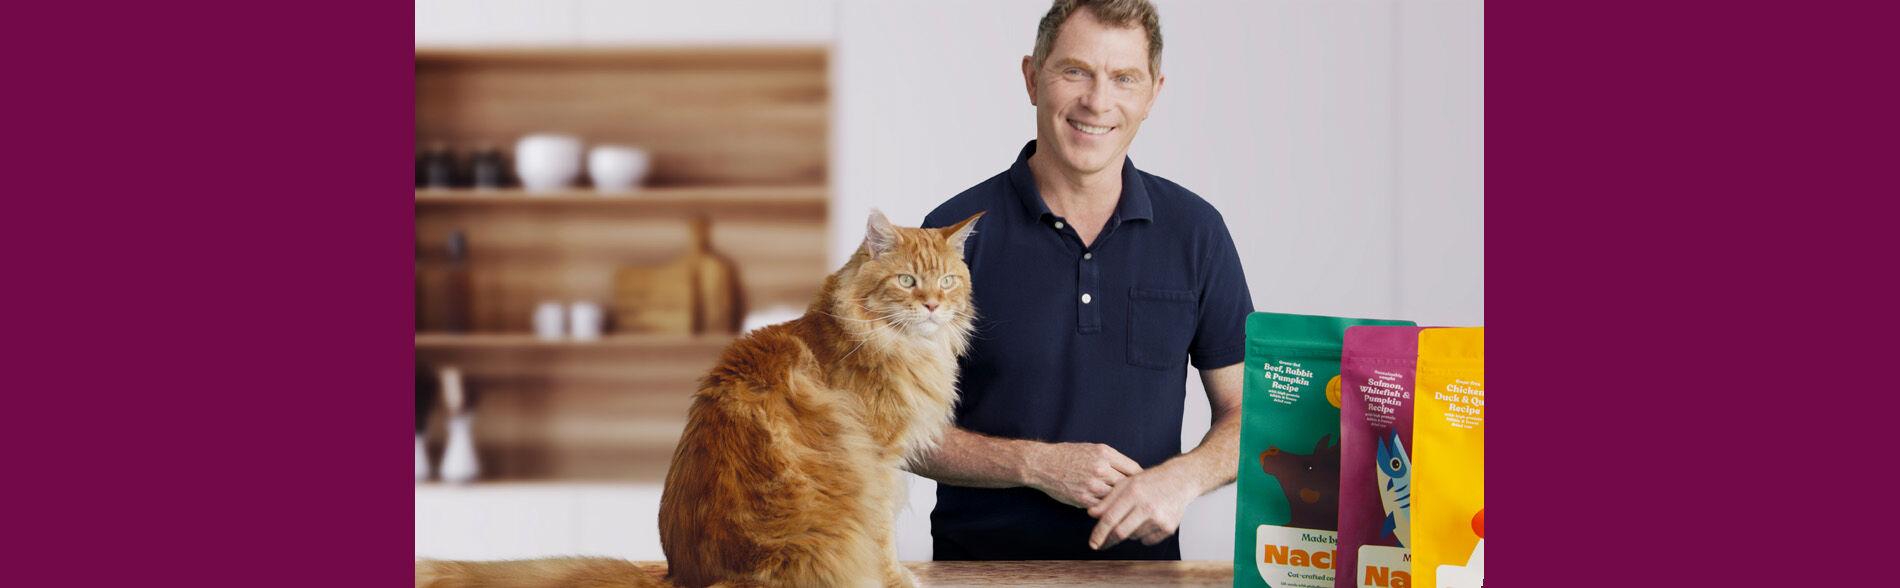 New Premium Cat Food Brand Founded by Bobby Flay Hits Market News